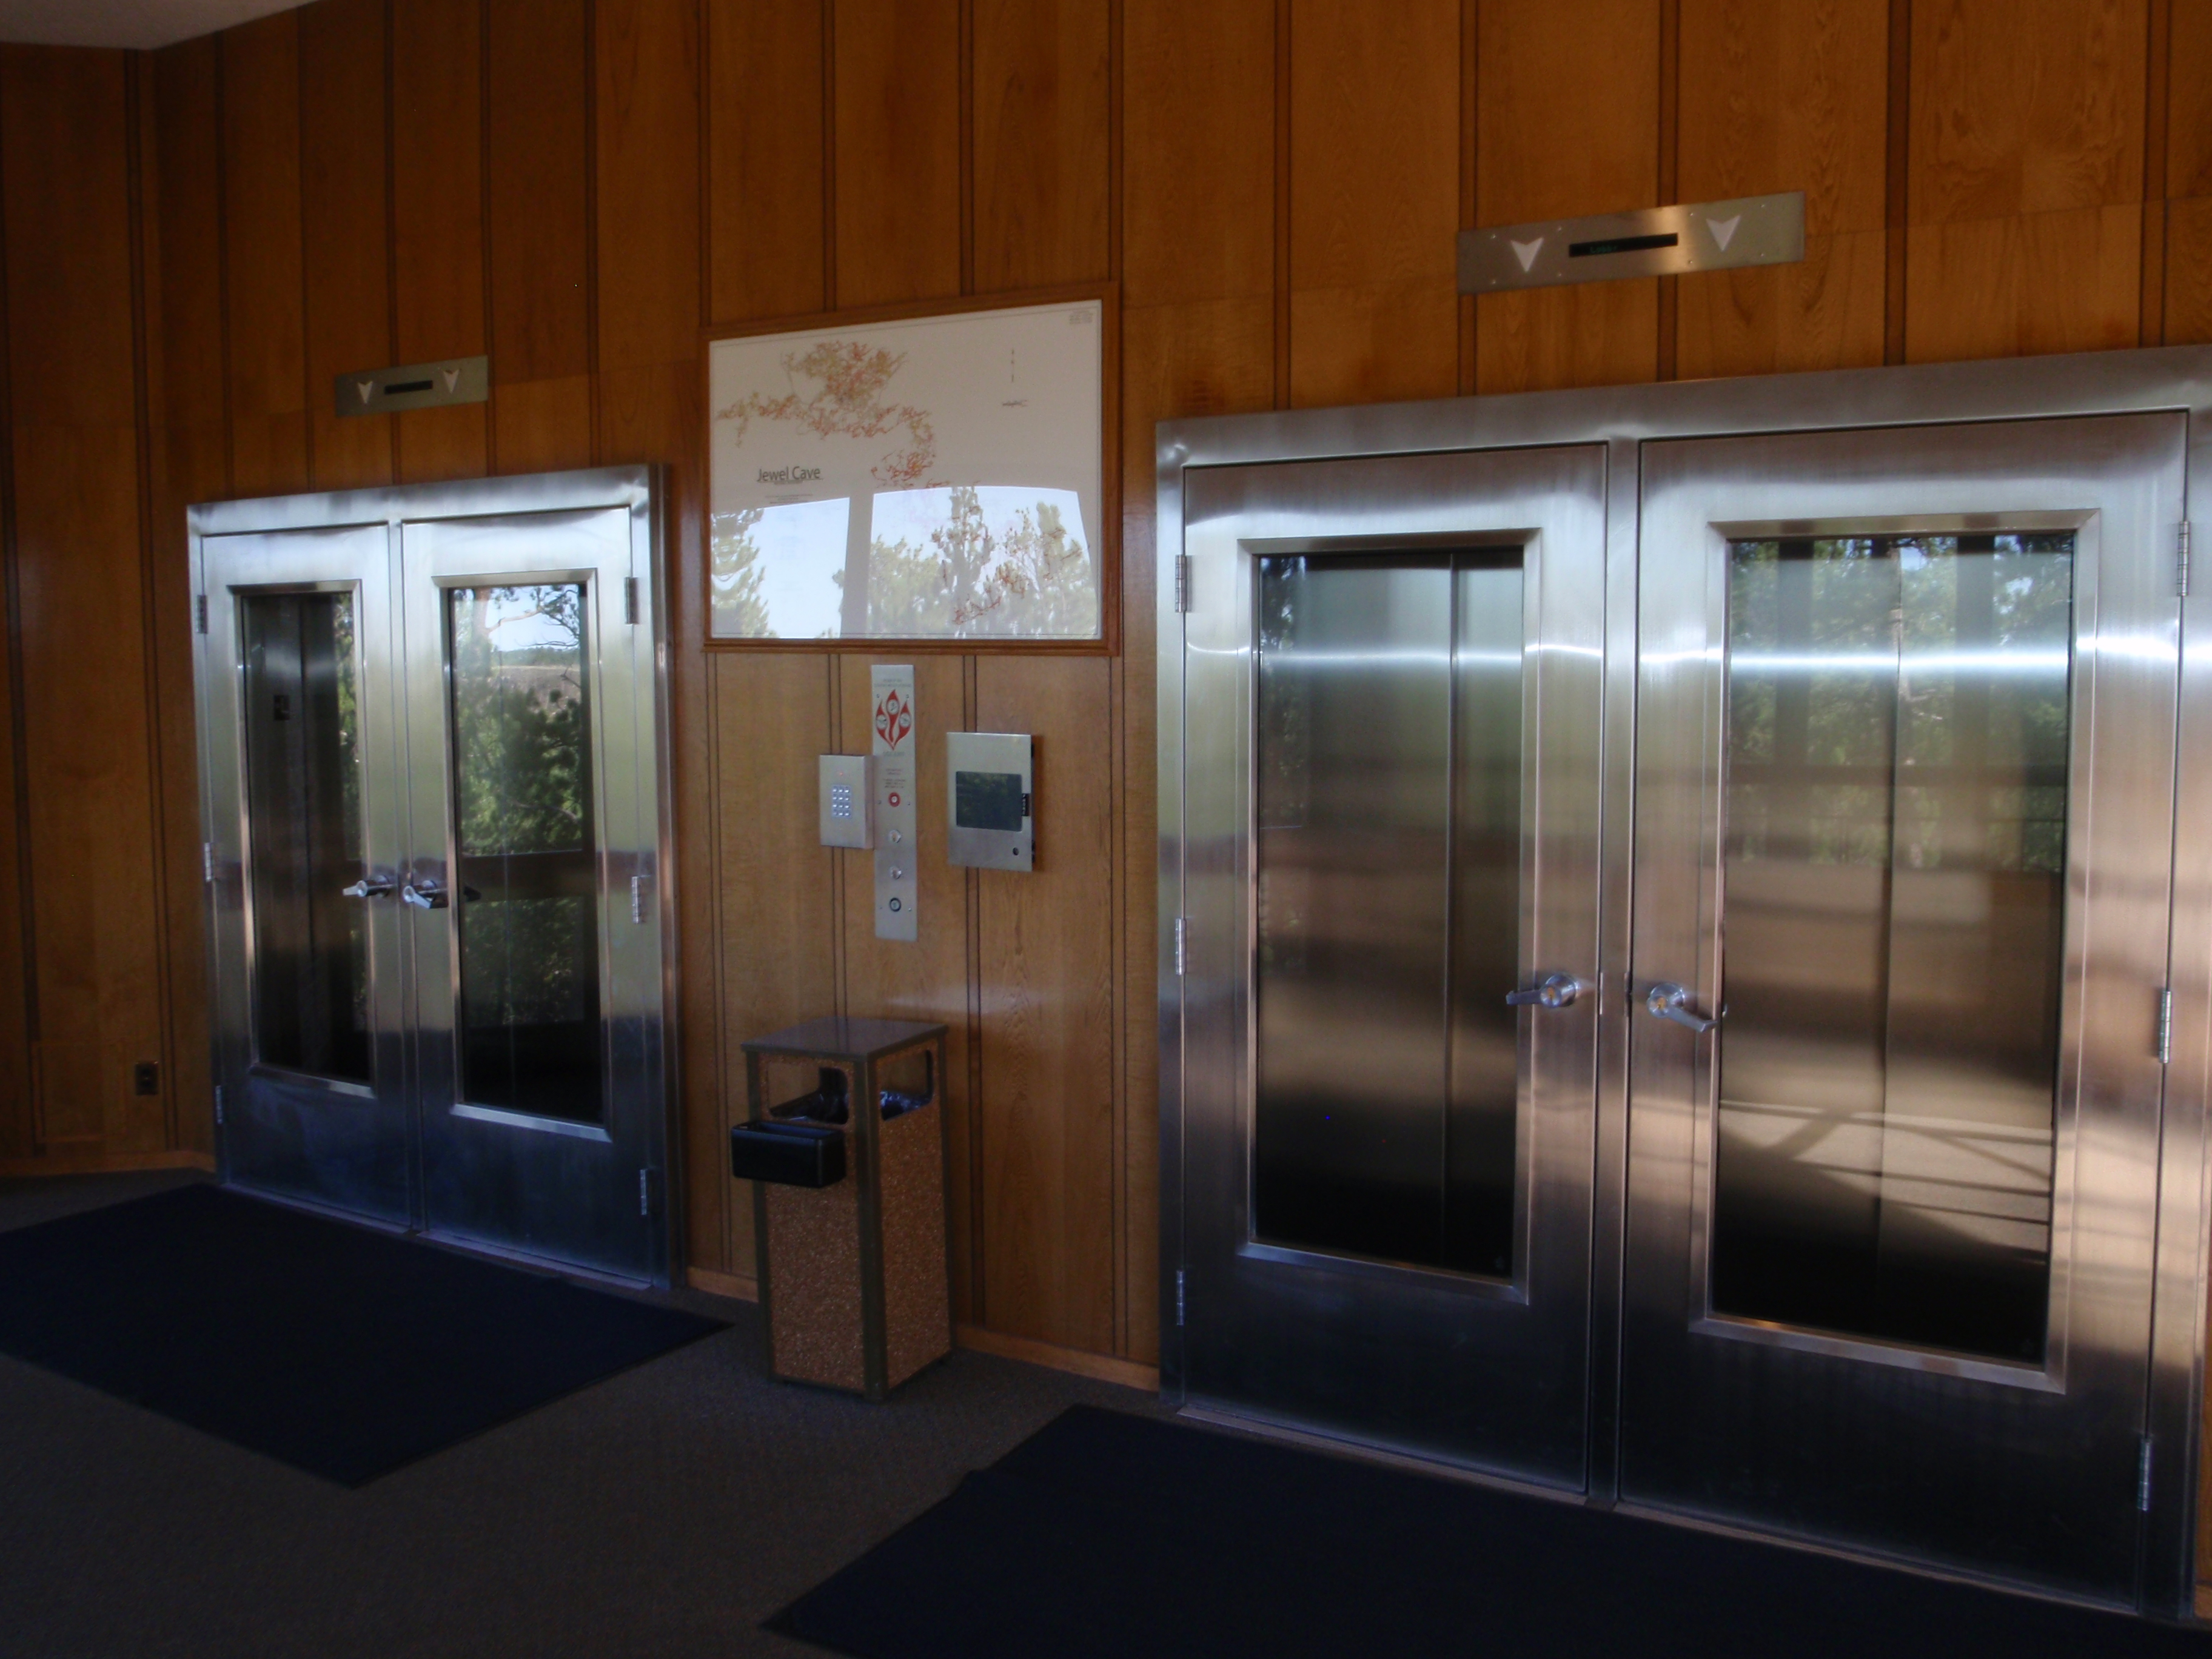 Two silver-colored sets of elevator doors with large glass fronts.